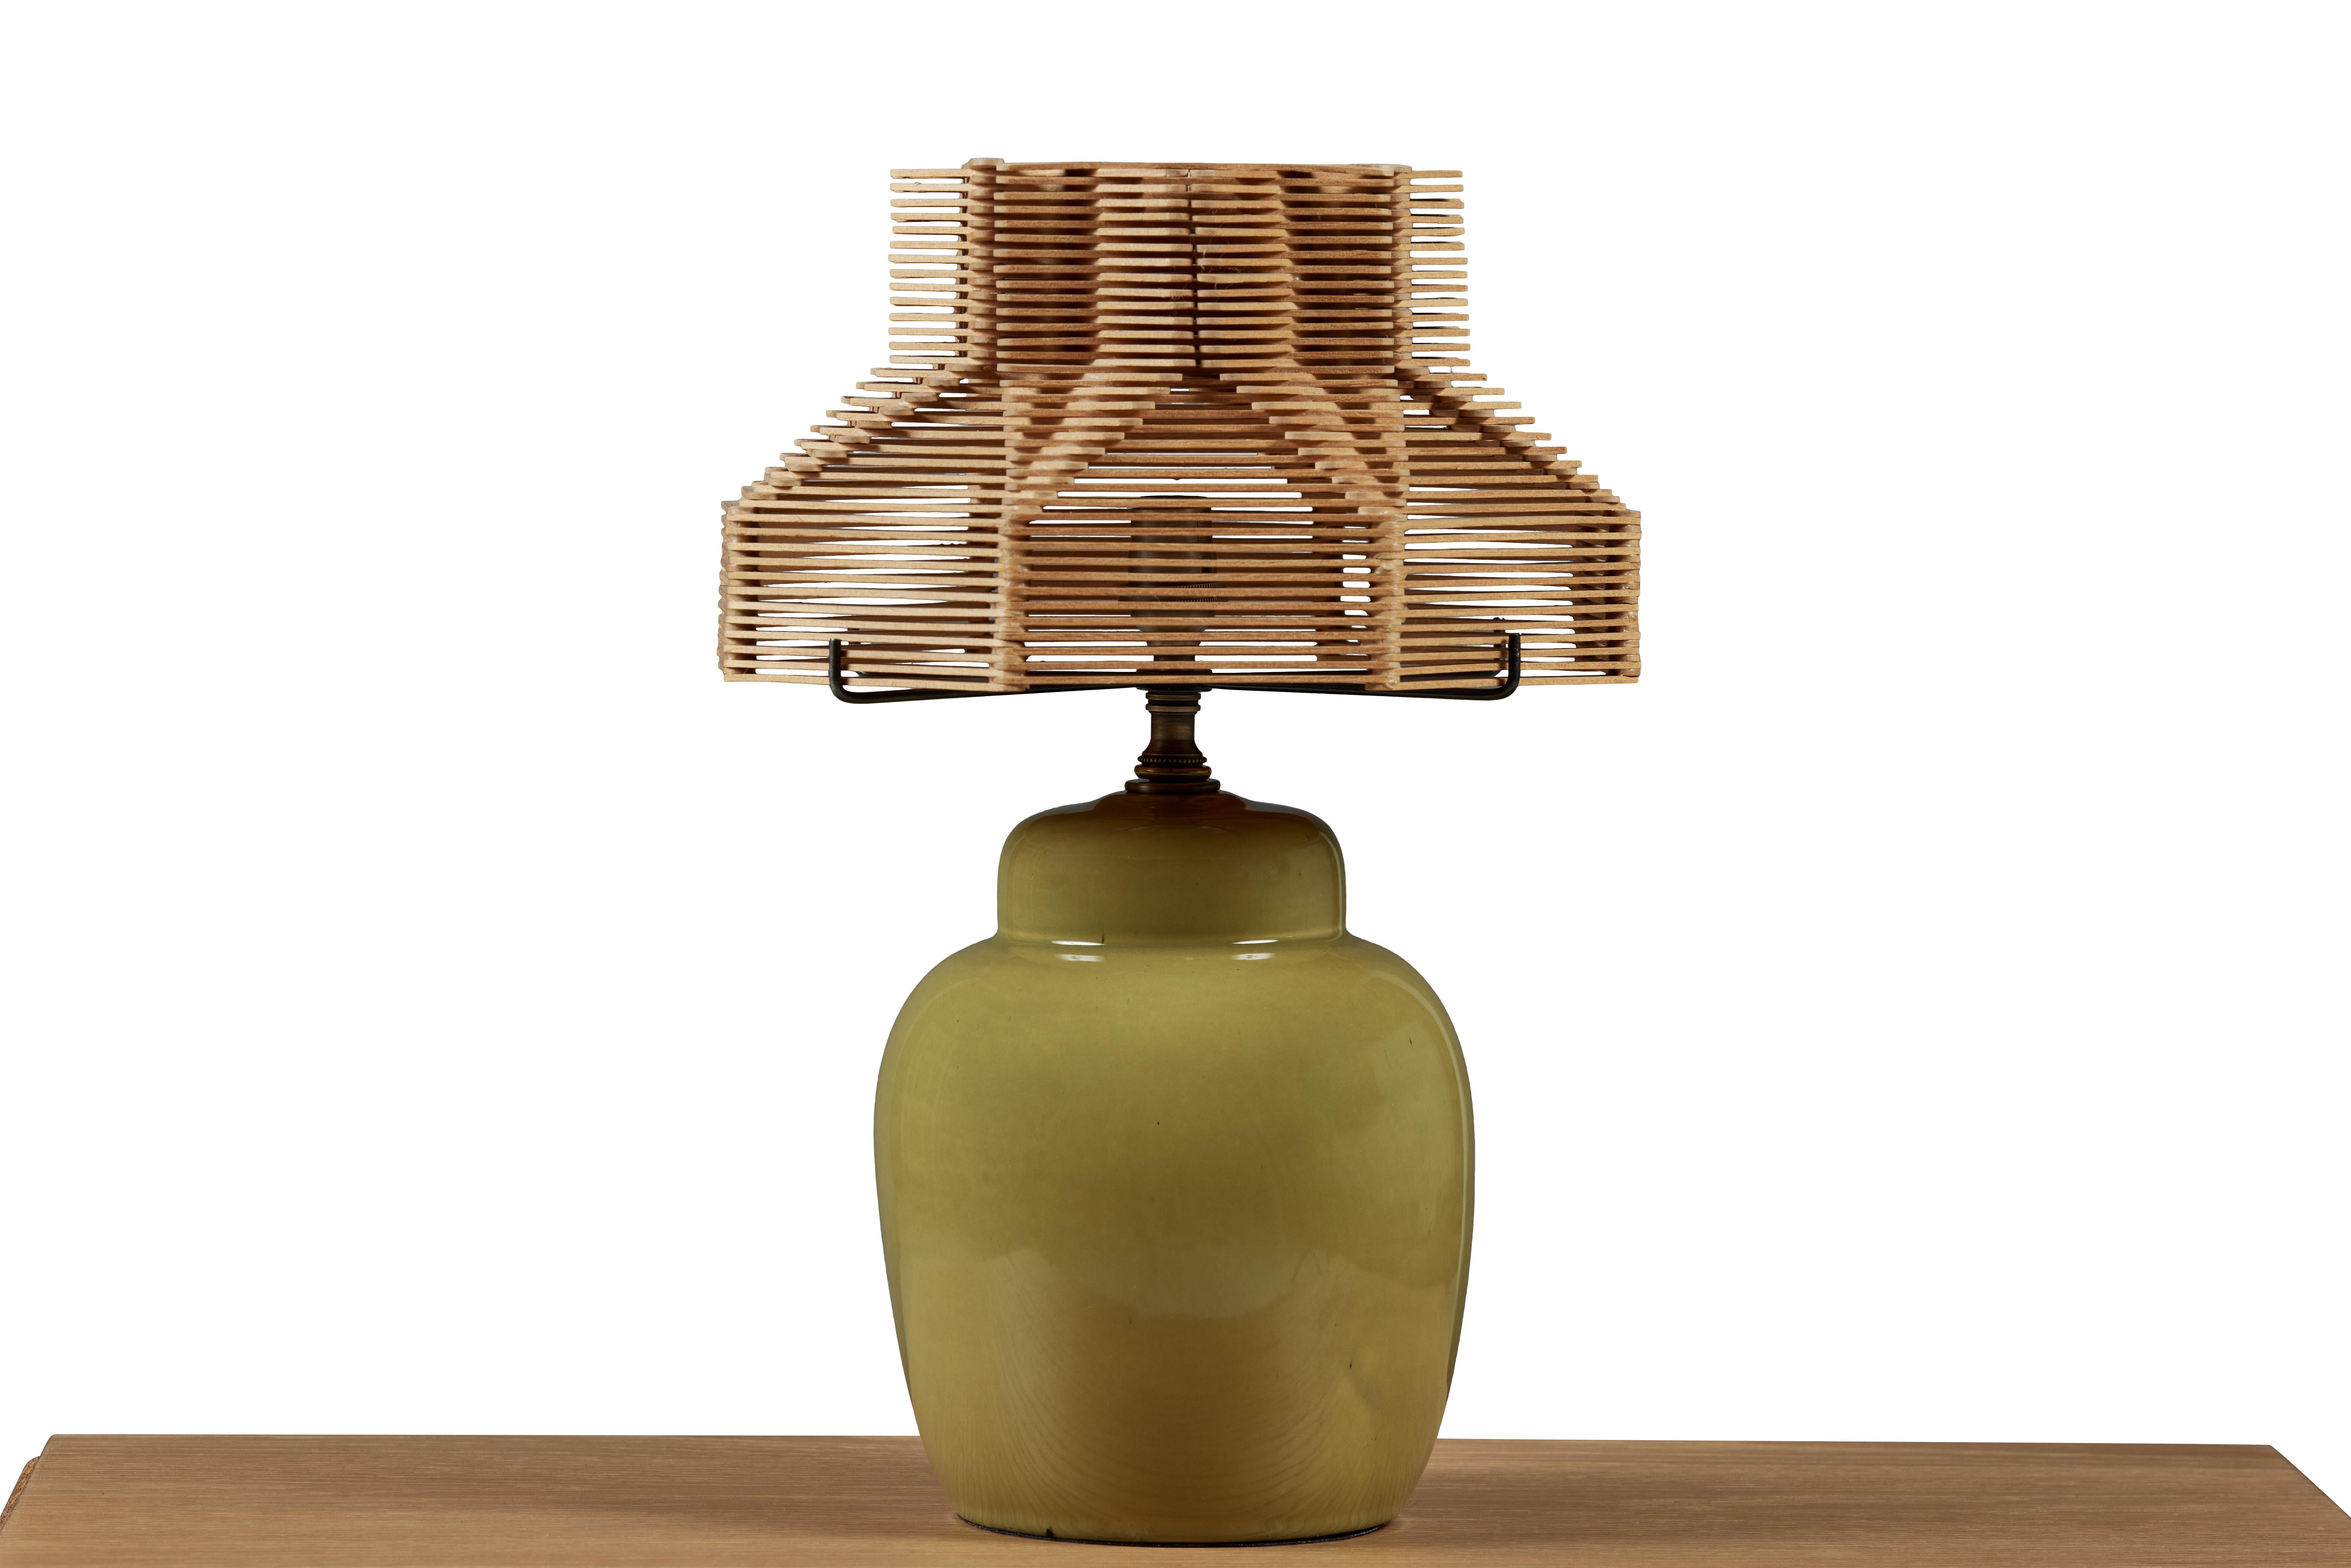 lampshade made of popsicle sticks